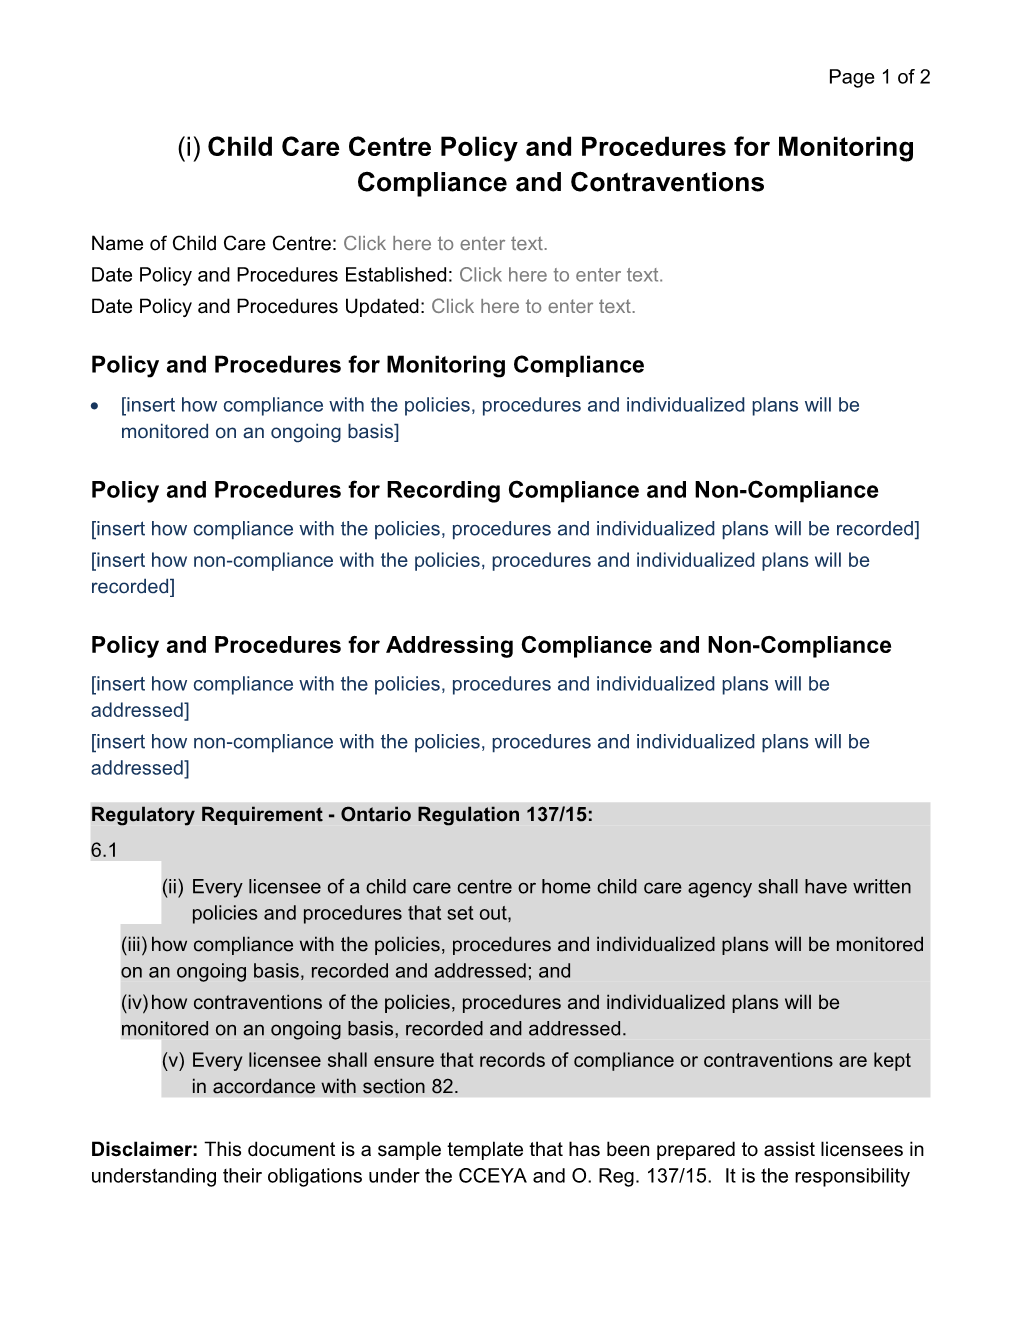 Child Care Centrepolicy and Proceduresfor Monitoring Compliance and Contraventions